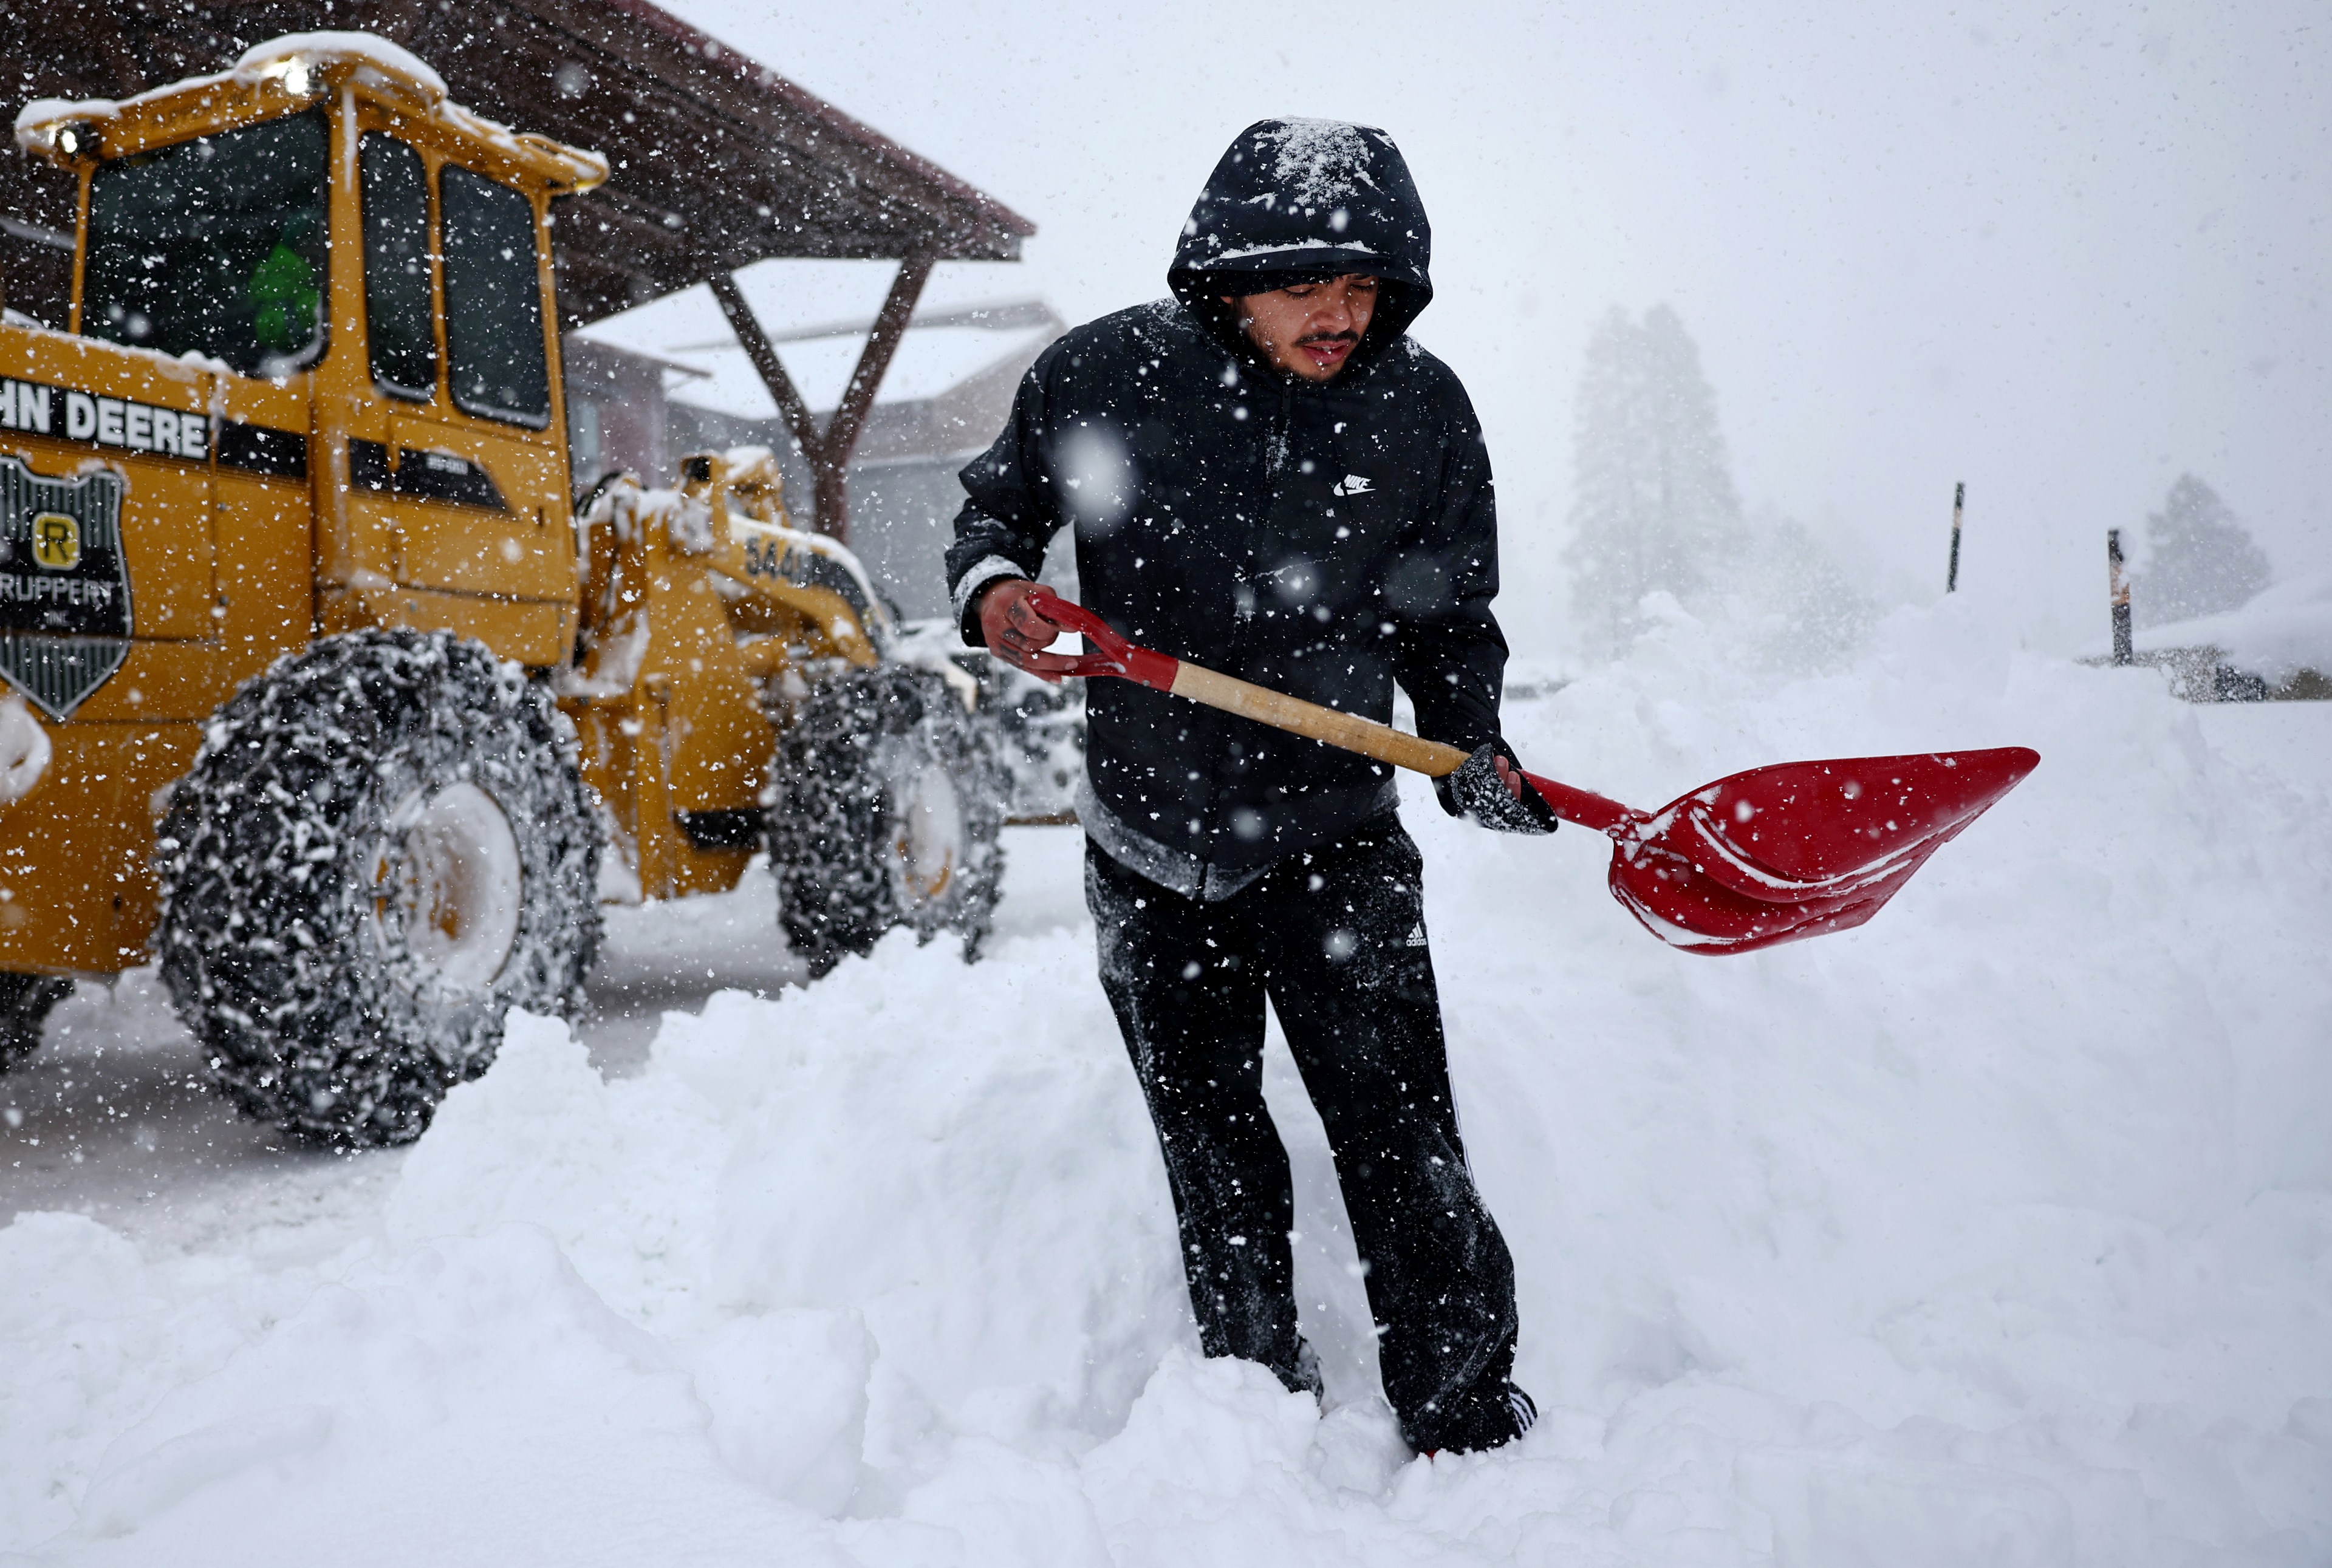 Man standing in knee deep snow shovels snow in front of yellow tractor